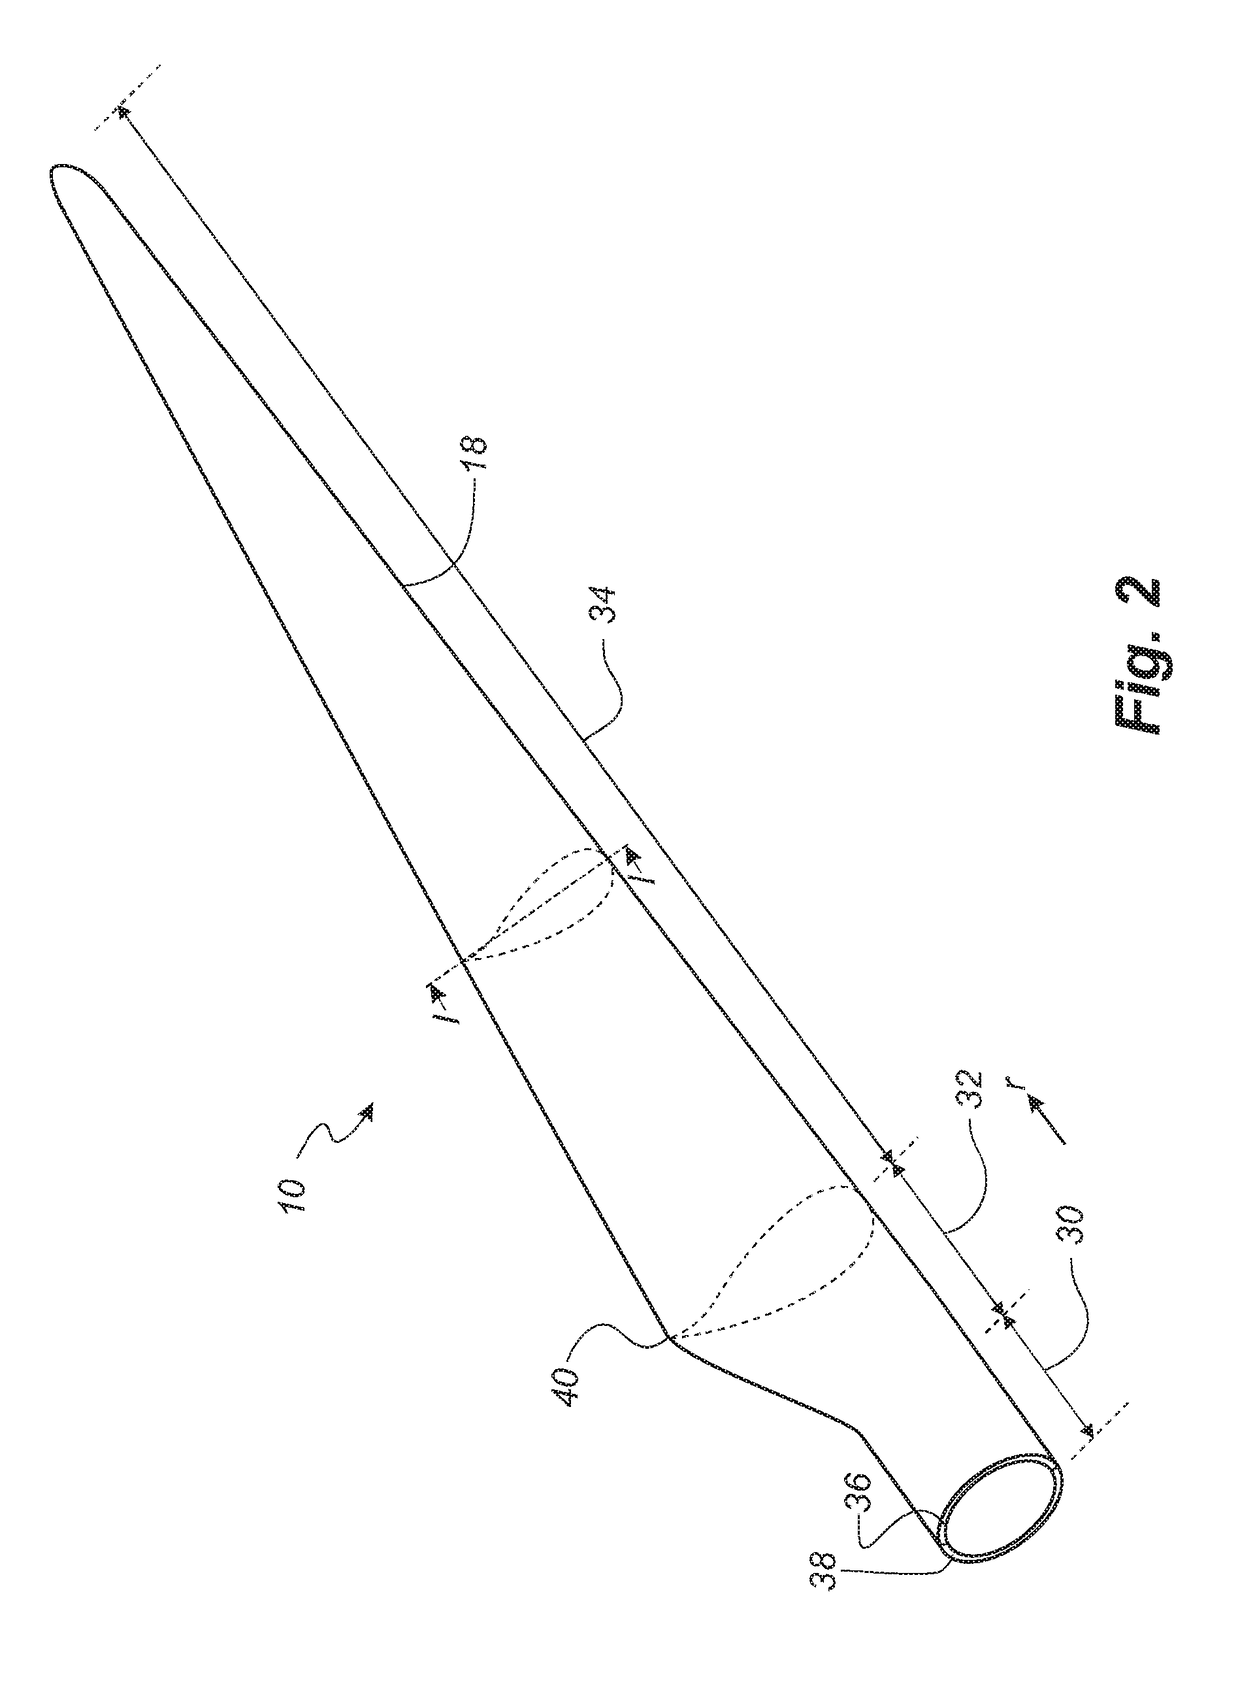 Method of manufacturing a composite laminate structure